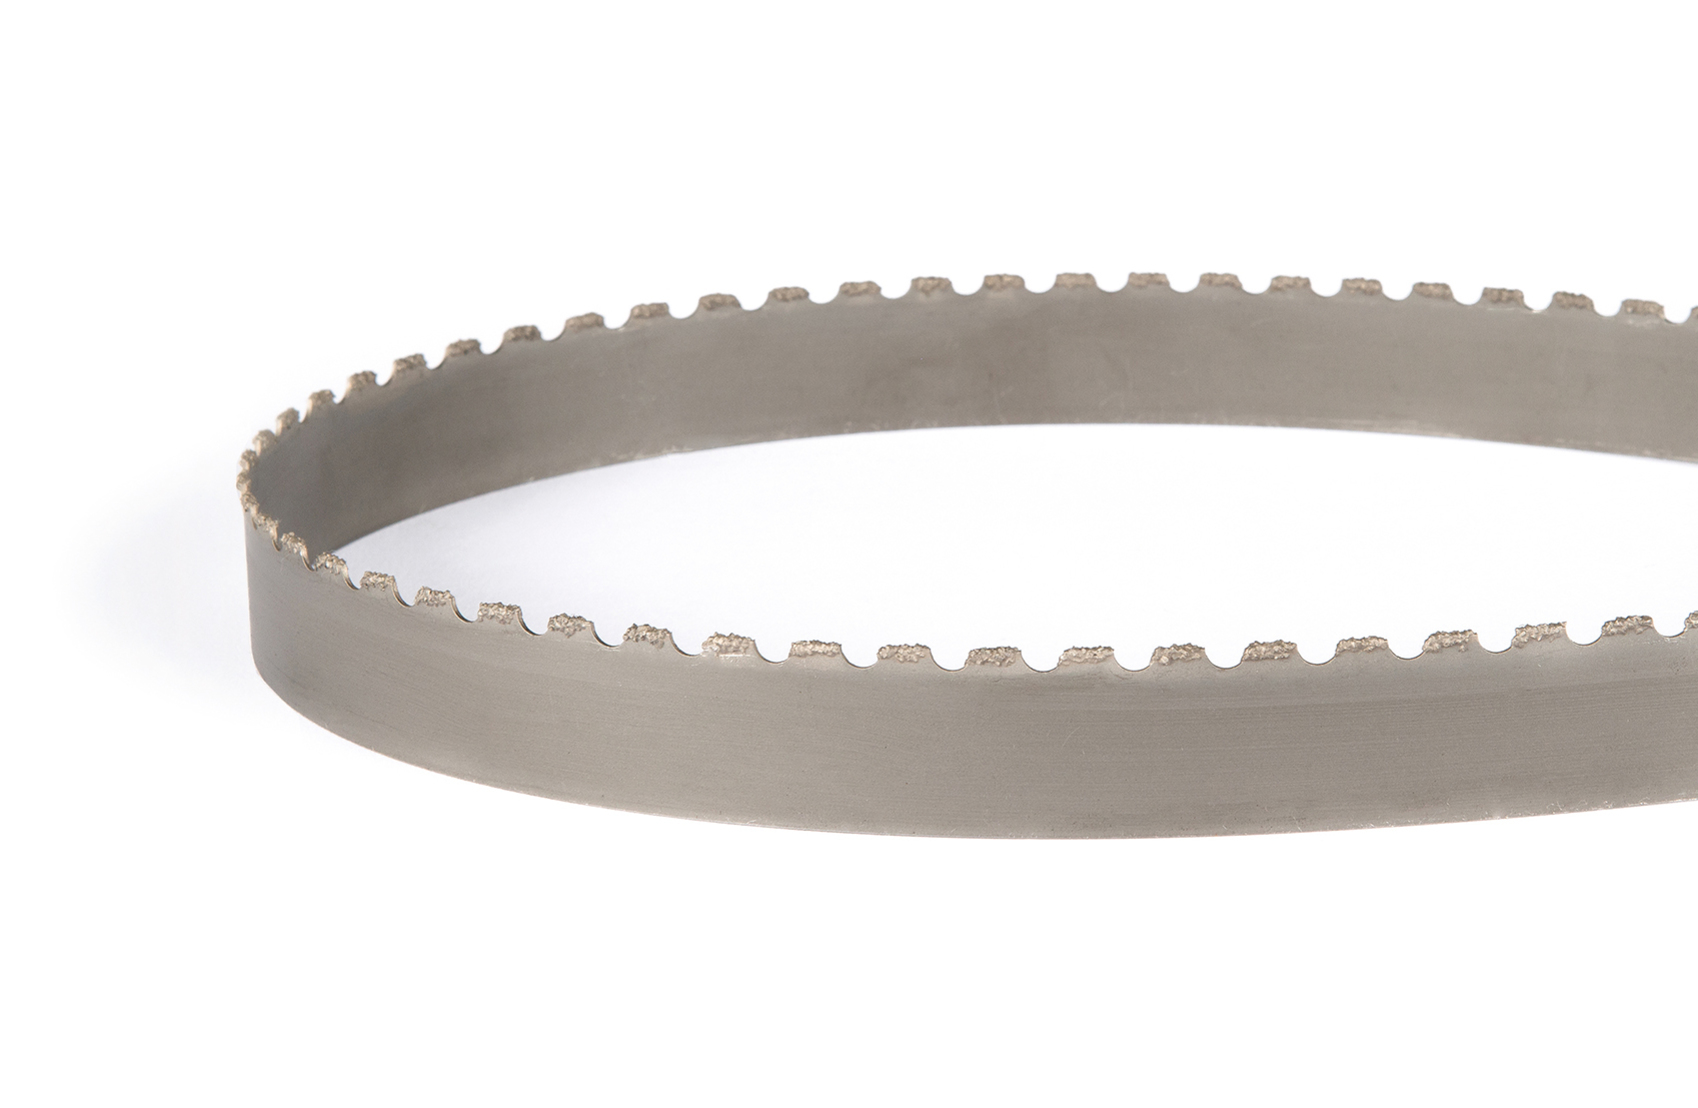 UK MATERIAL ALL COMMON SIZES BANDSAW BLADES UK MADE 